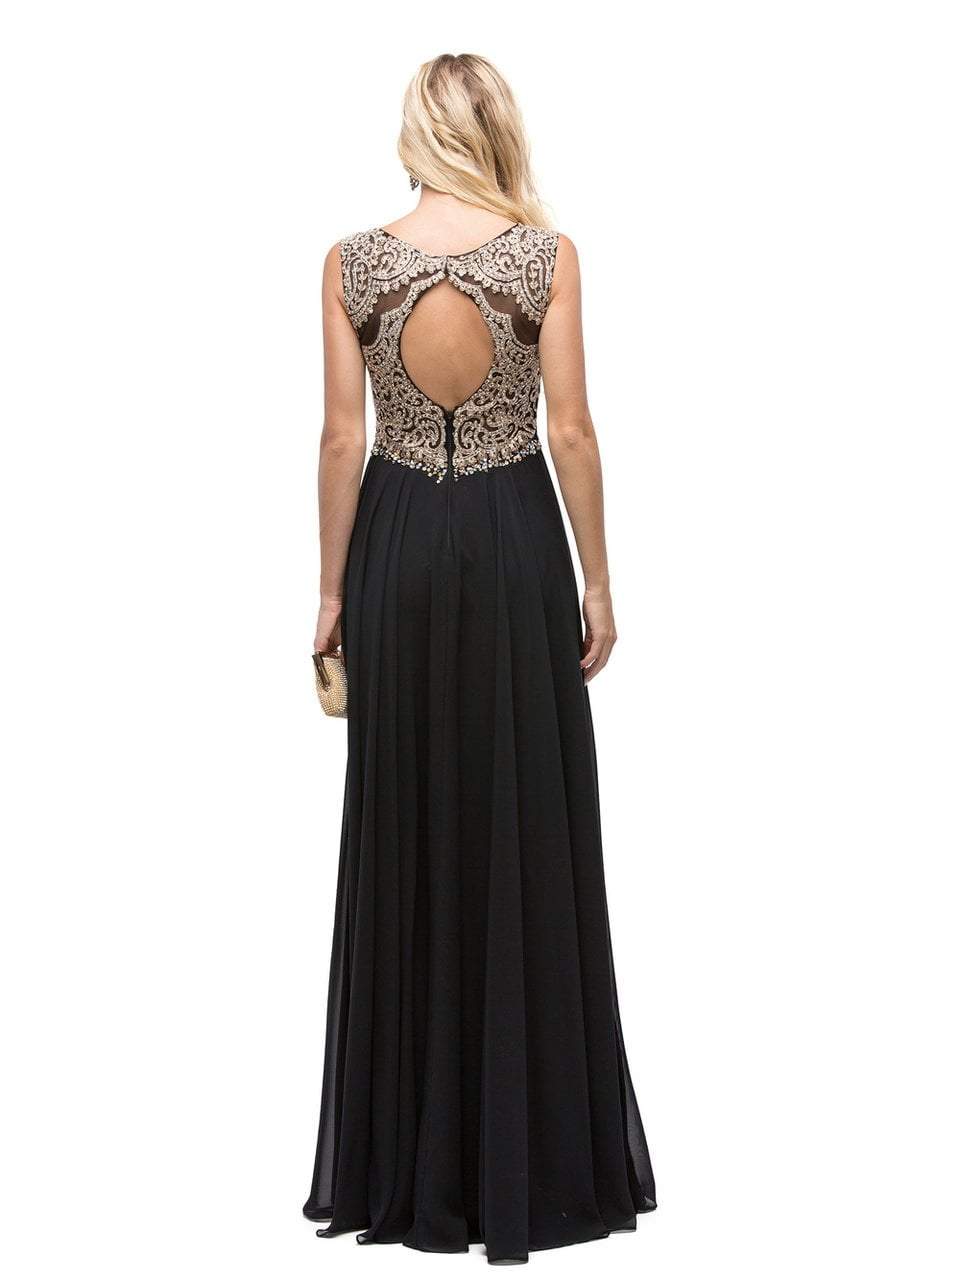 Dancing Queen Bridal - 9826 Gilded Lace Illusion A-Line Prom Dress Bridesmaid Dresses XS / Black